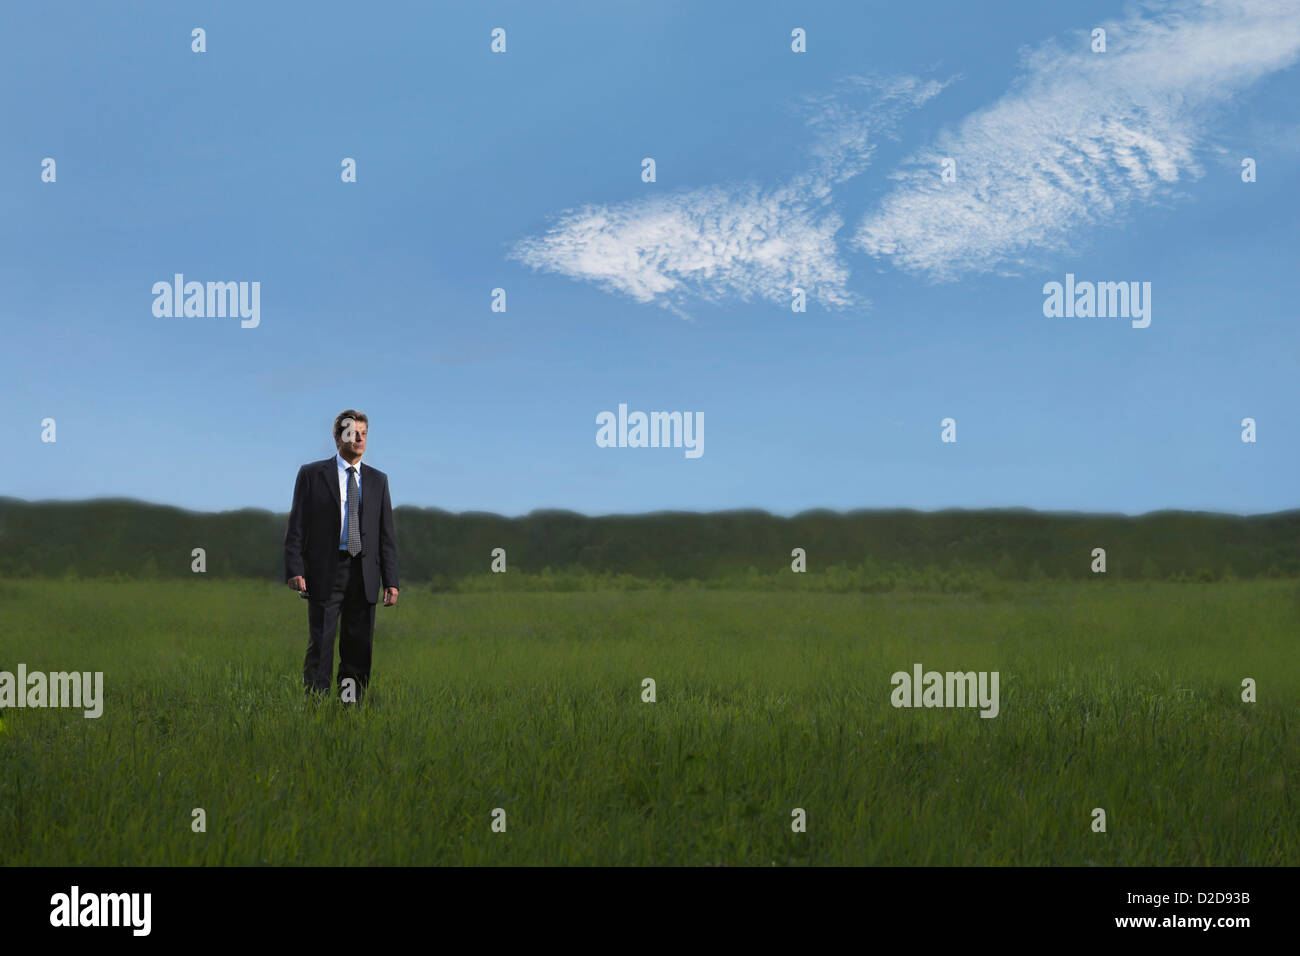 A businessman walking through a field in a remote location Stock Photo